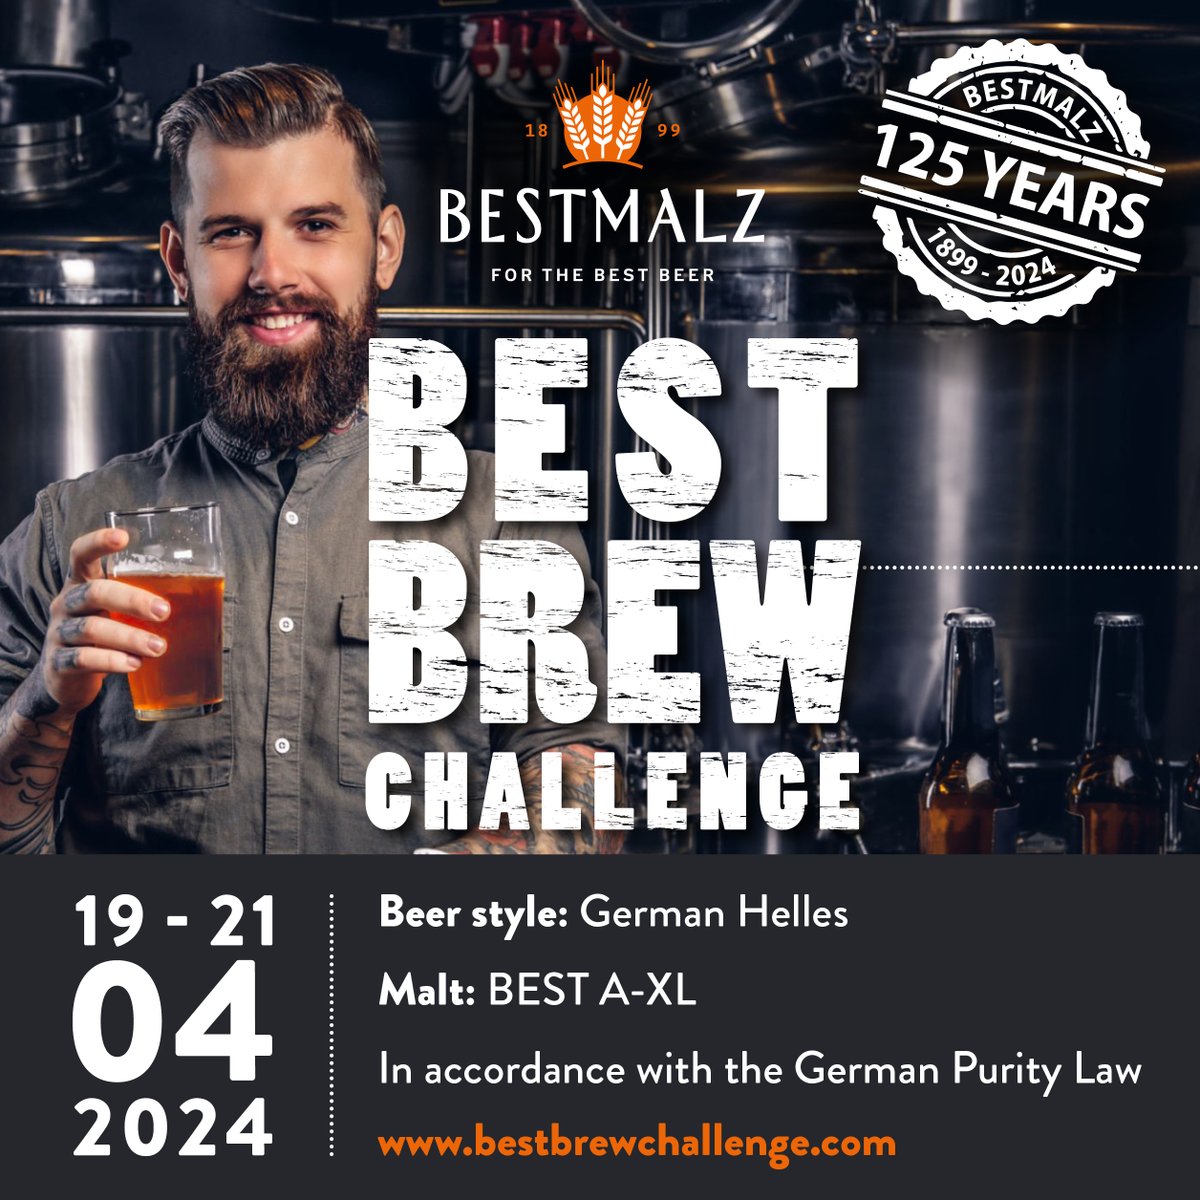 Registration is now open for the #BestBrewChallenge 2024! This year's challenge – to brew the perfect German-style Helles using BEST A-XL! Full information on bestbrewchallenge.com #maltitup